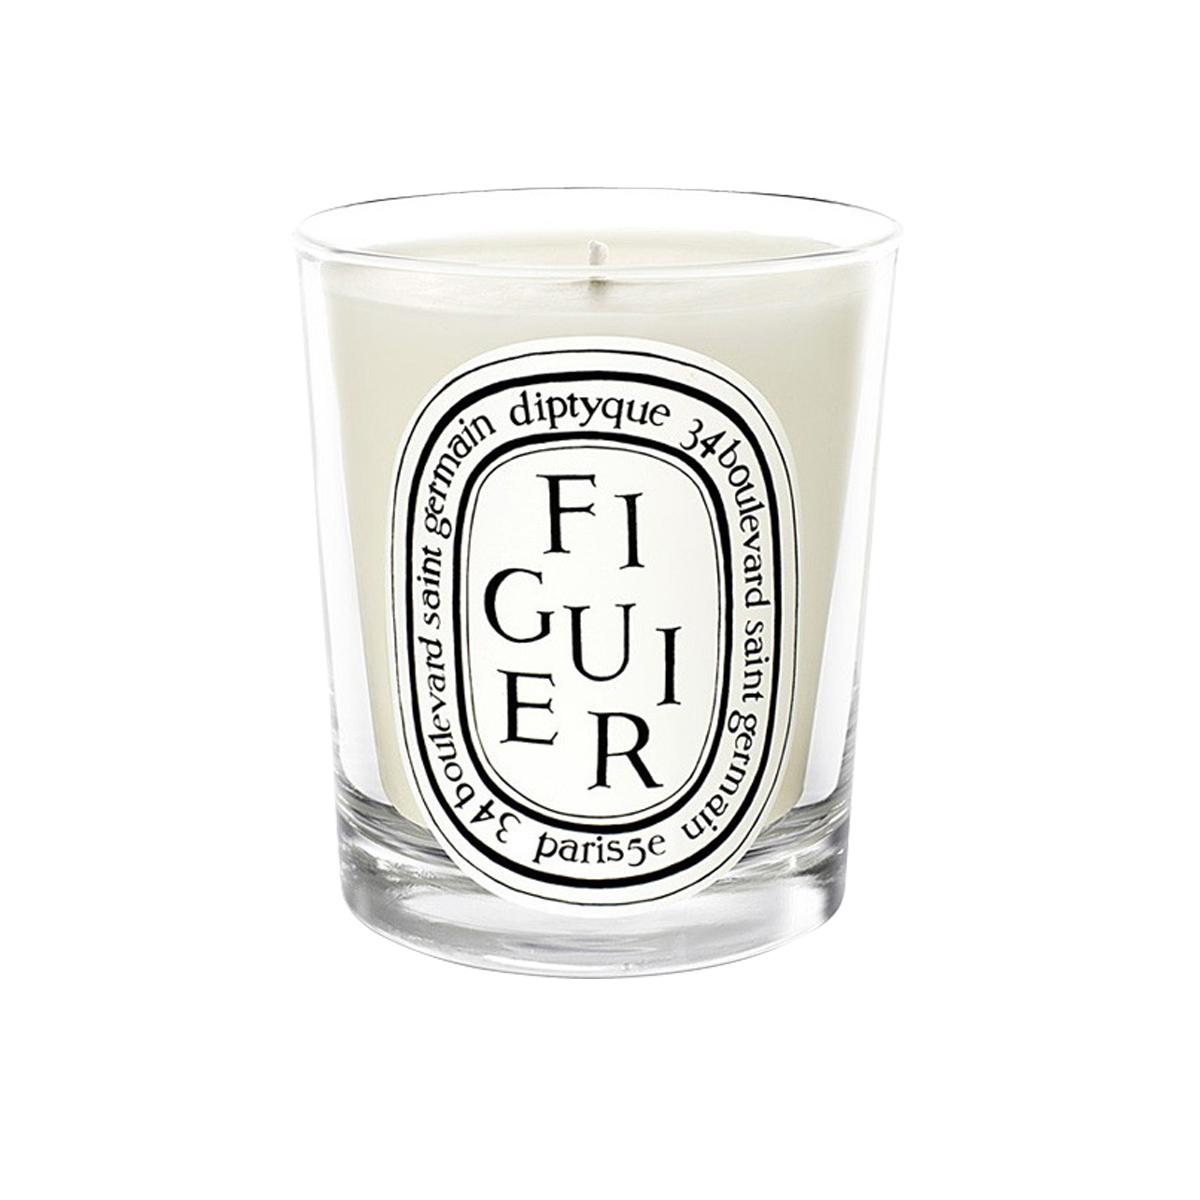 Primary image of Figuier (Fig Tree) Candle